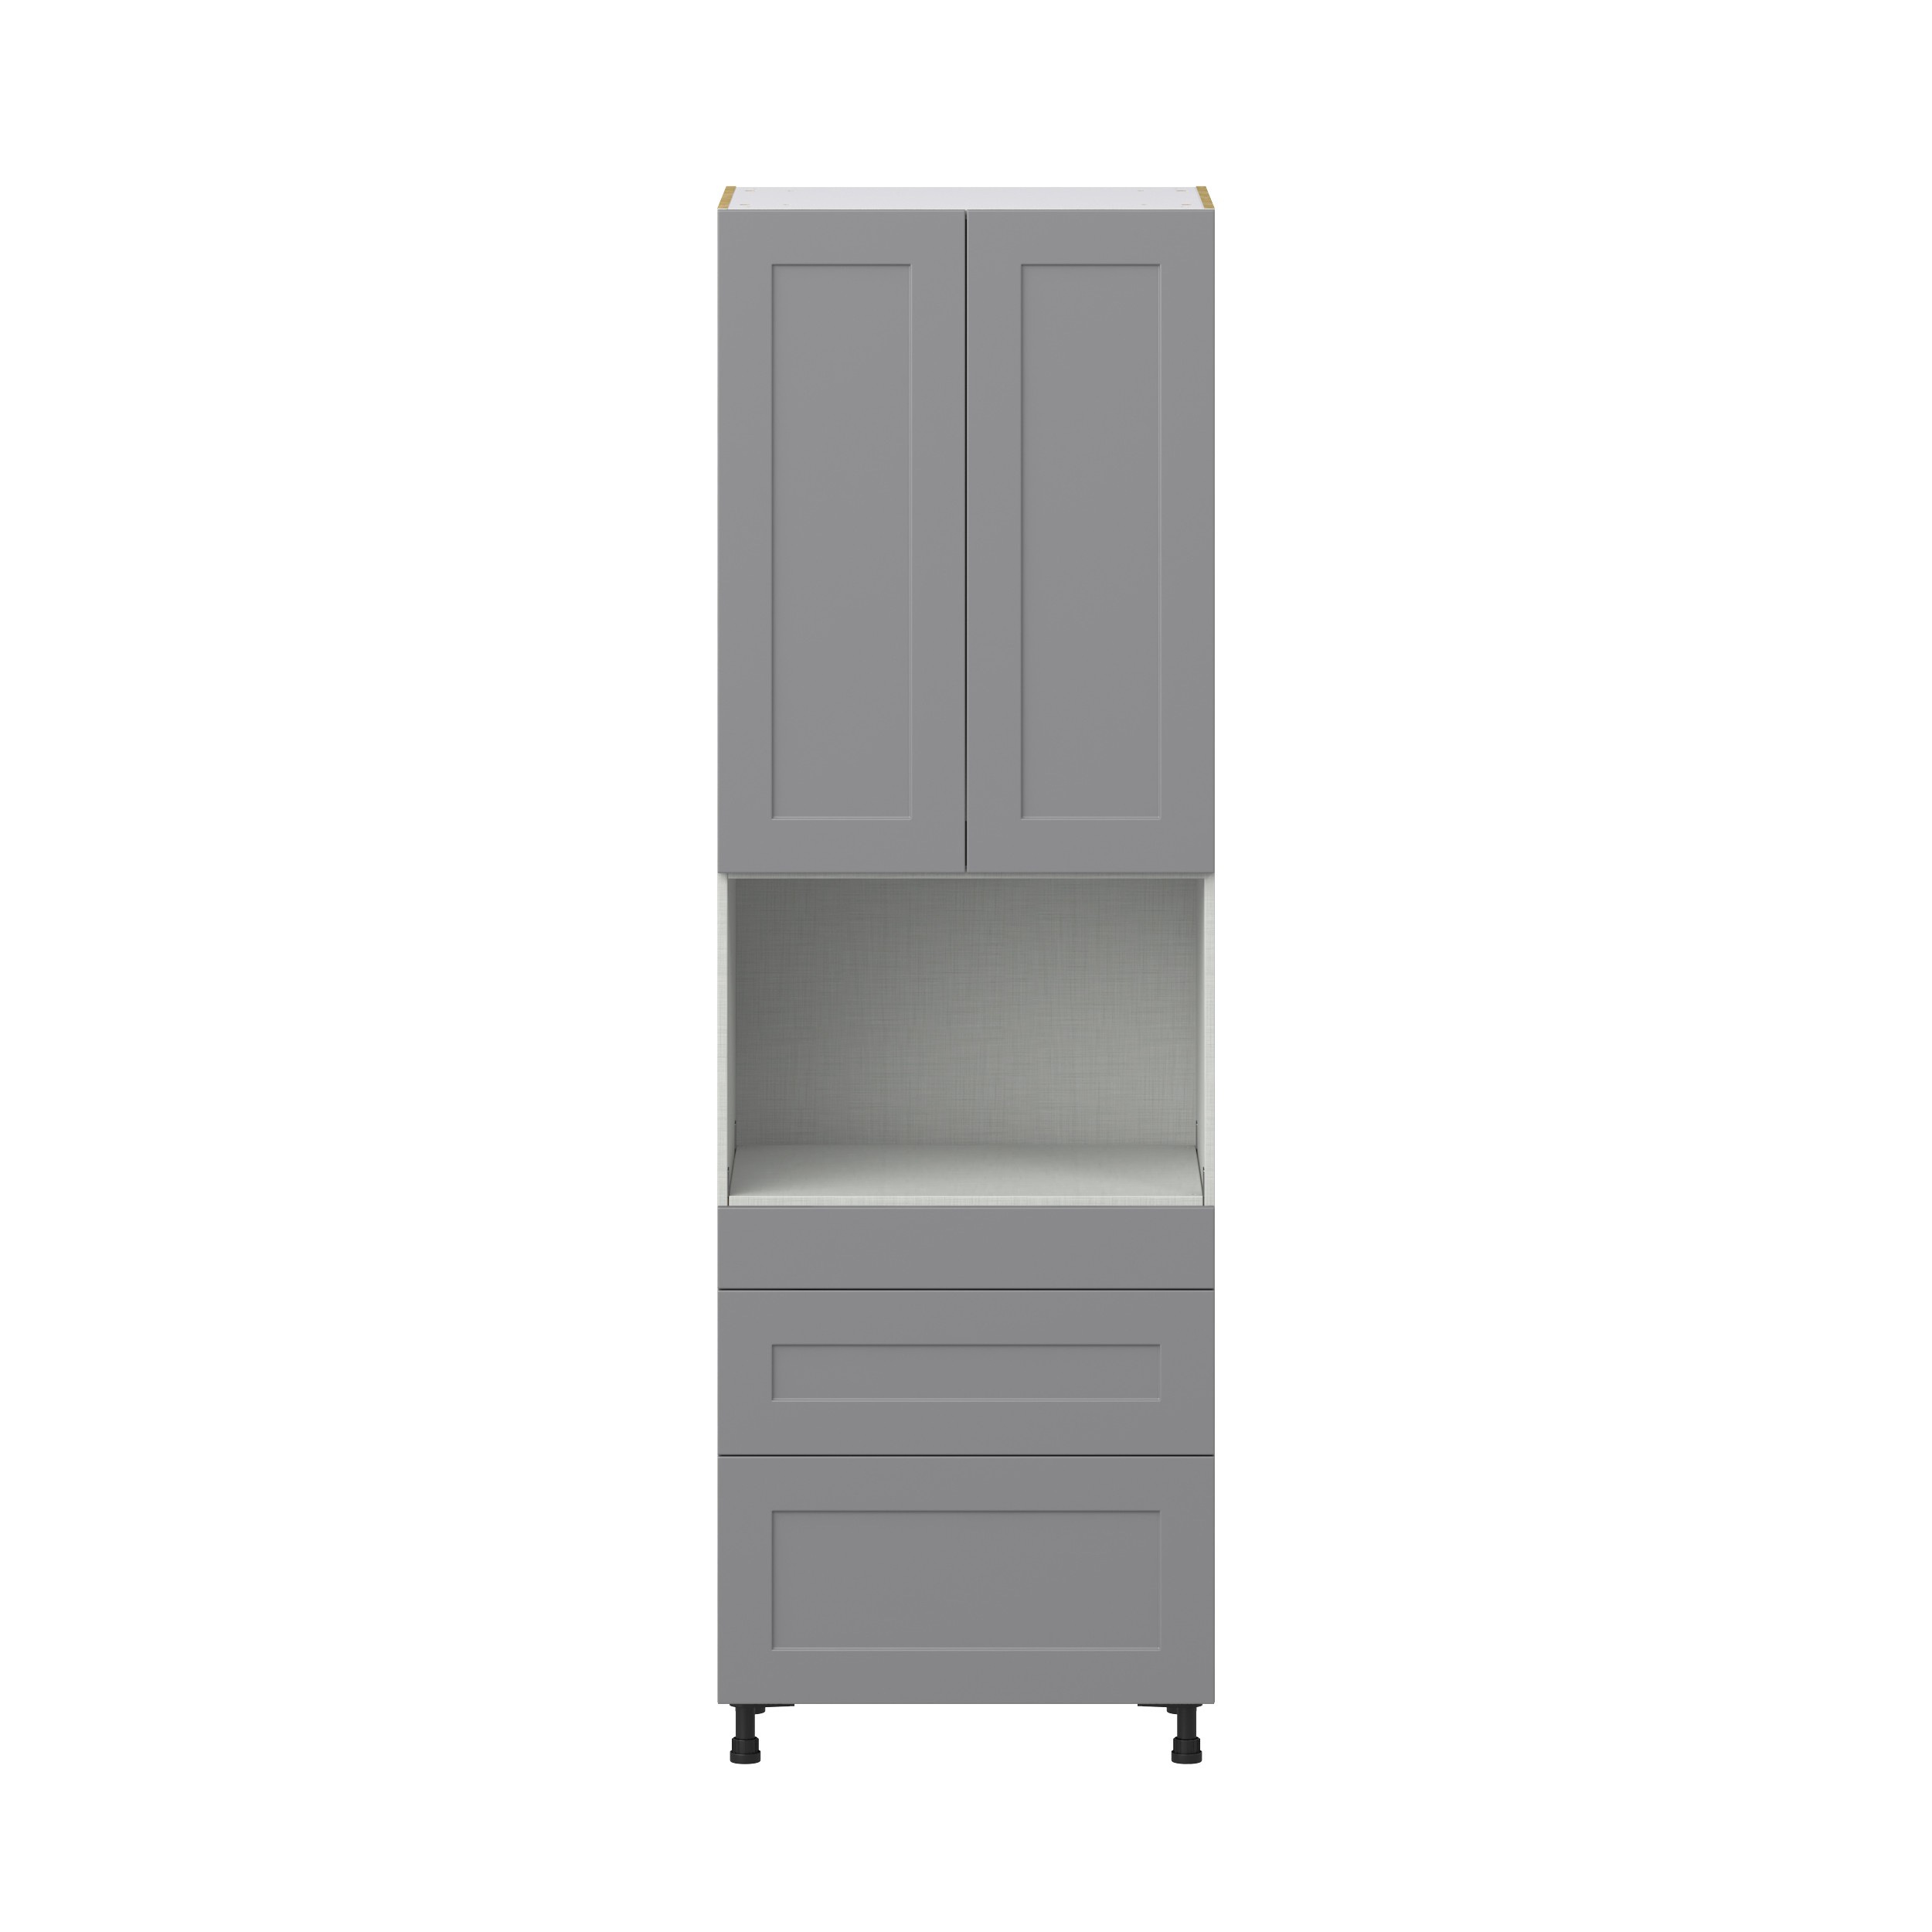 Willow Painted Slate Gray Shaker Assembled Pantry Microwave Cabinet with 3 Drawers (30 in. W x 94.5 in. H x 24 in. D)